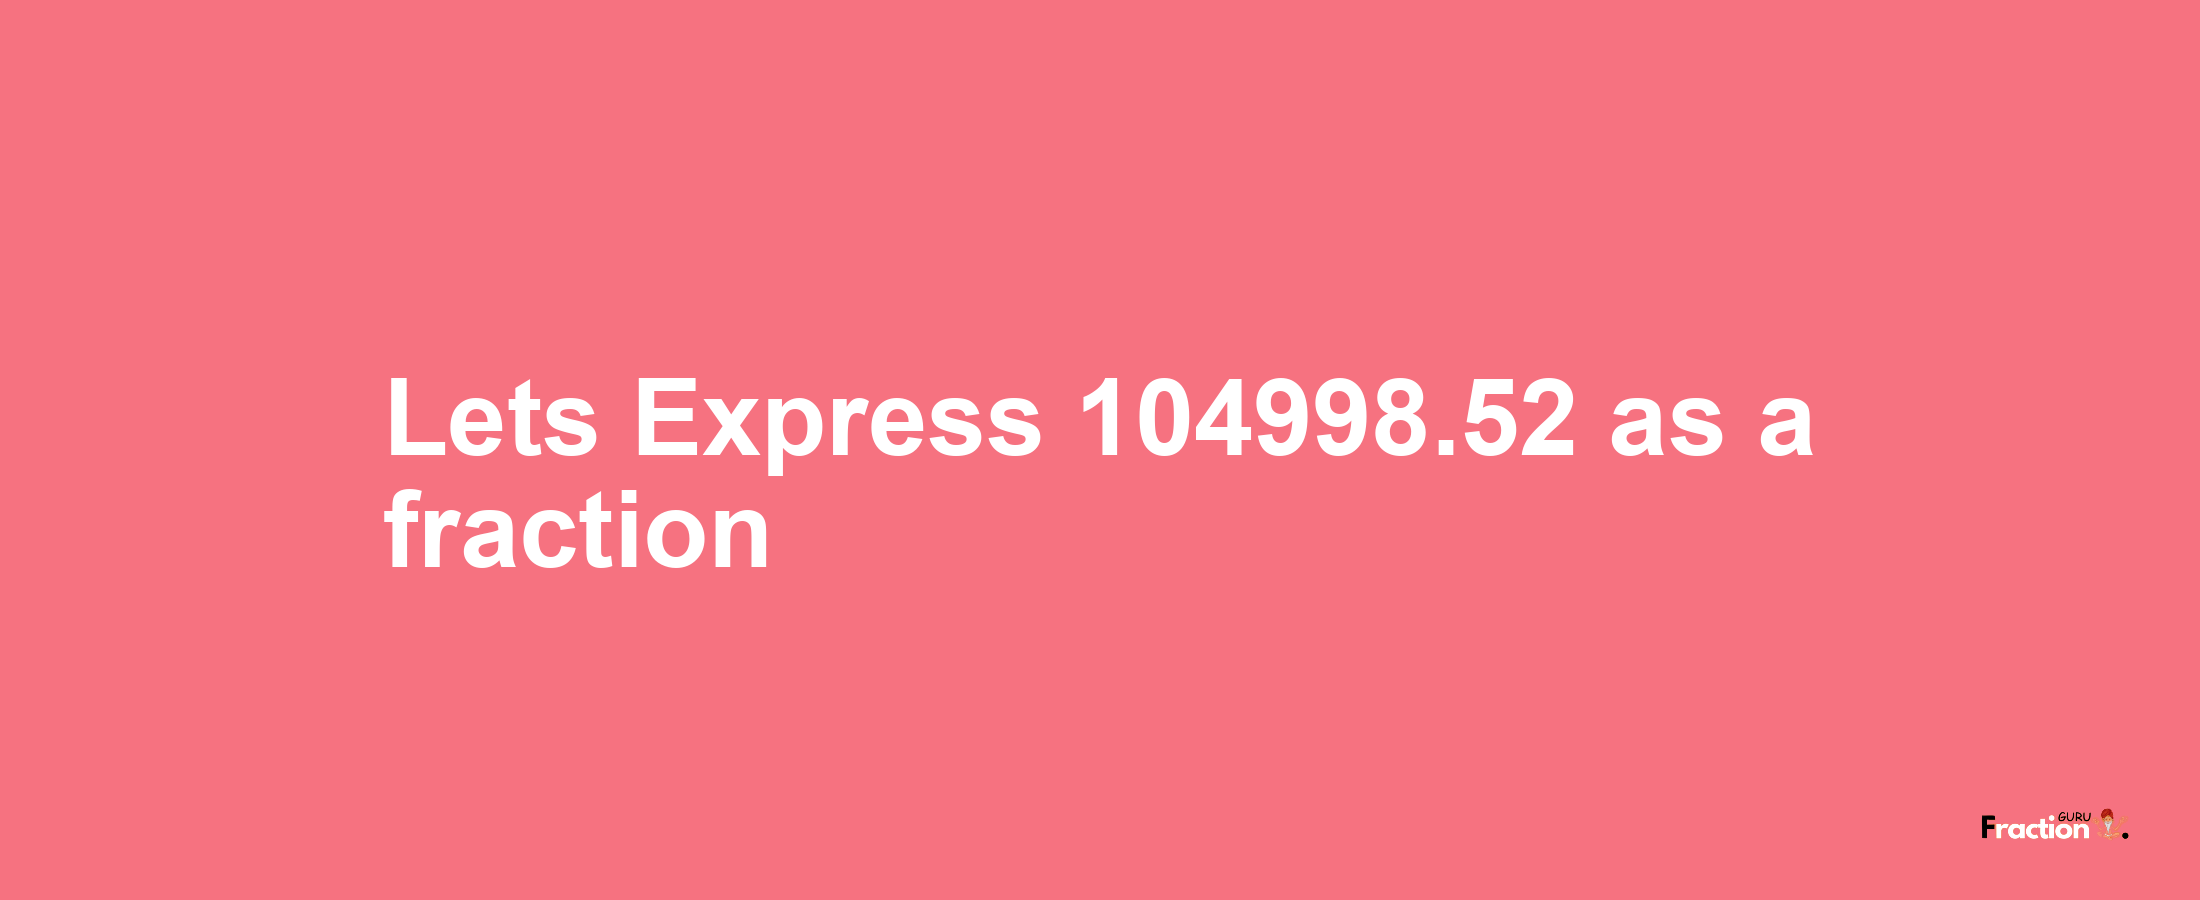 Lets Express 104998.52 as afraction